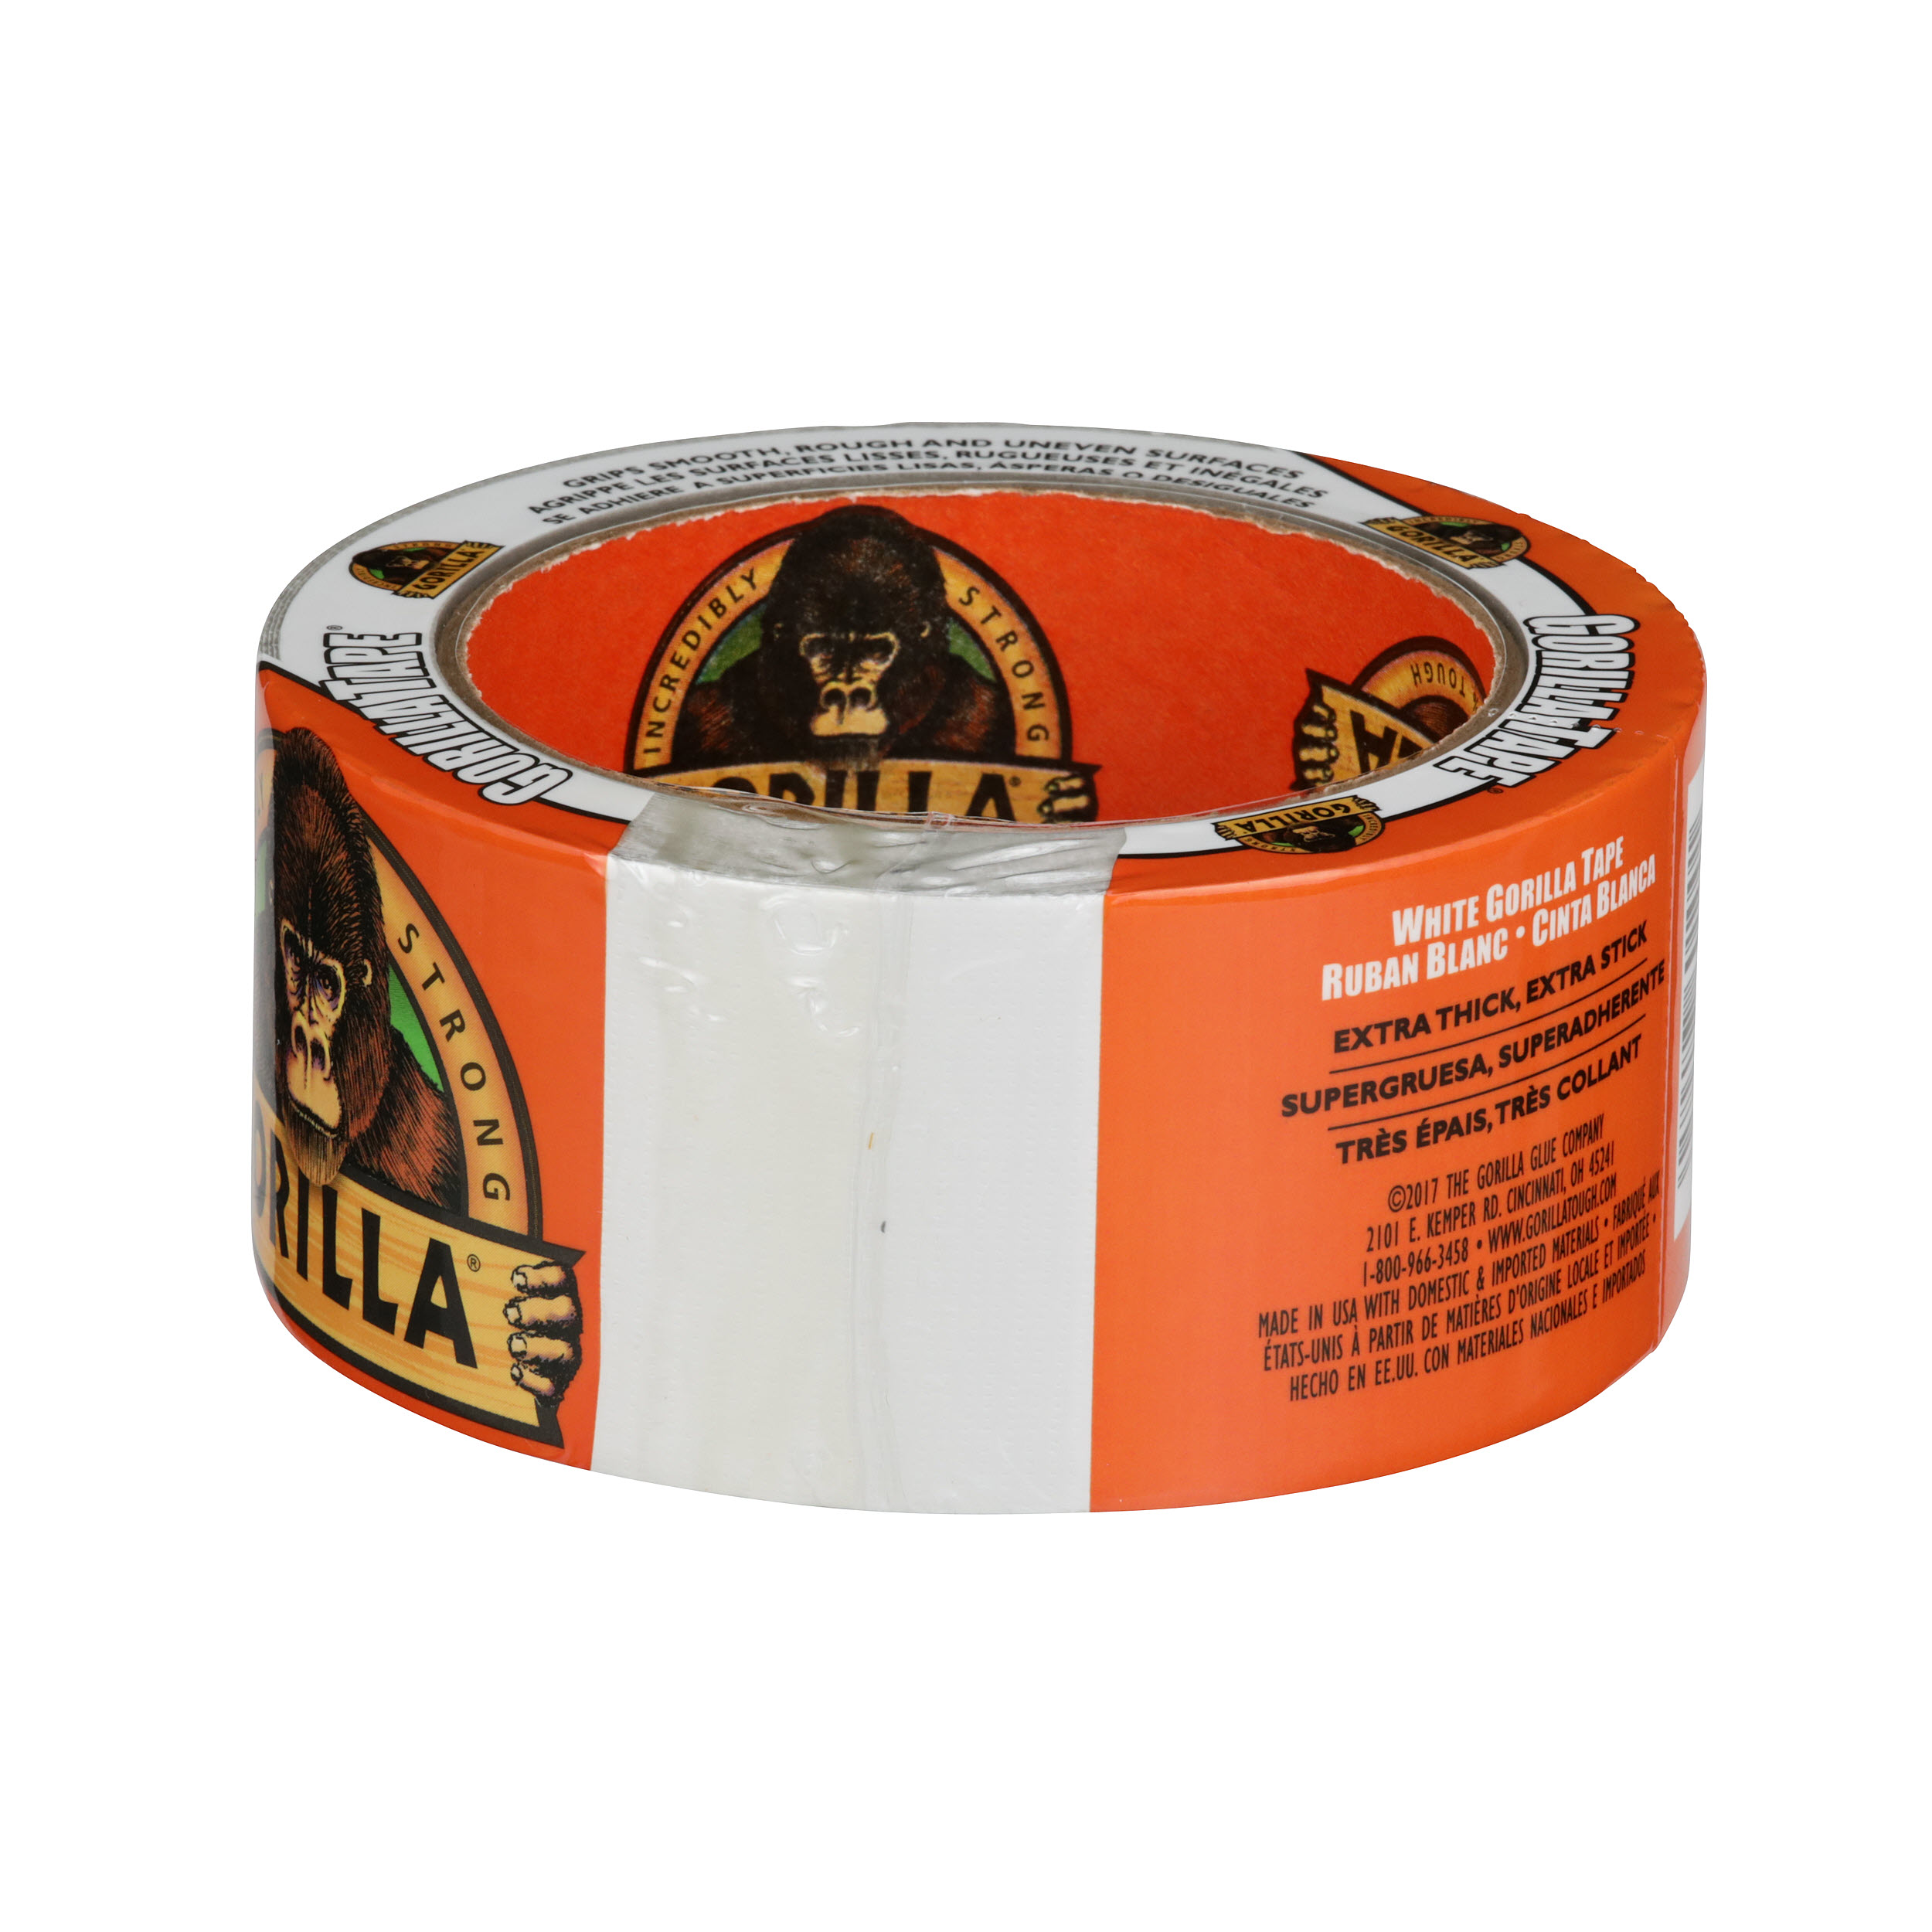 Gorilla Glue White Tape, 30yd Double Thick Adhesive Tape and Weather  Resistant. 